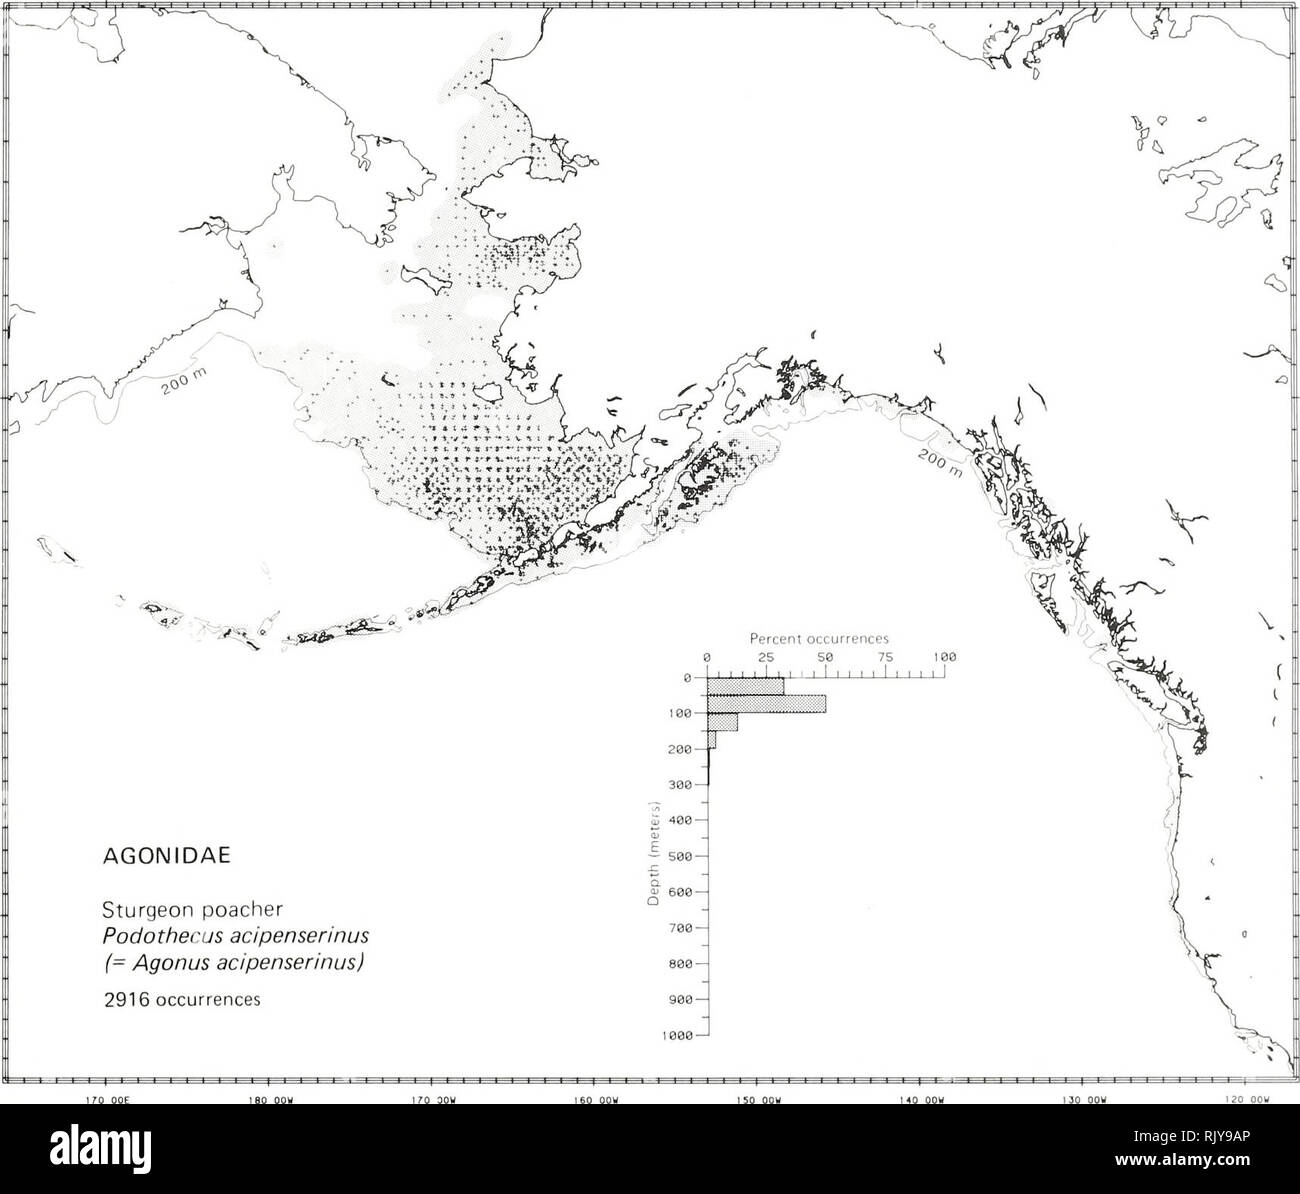 . Atlas and zoogeography of common fishes in the Bering Sea and Northeastern Pacific / M. James Allen, Gary B. Smith. Fishes Bering Sea Geographical distribution.. STURGEON POACHER, Podothecus acipenserinus (Pallas 1813 in Tilesius) Agonidae: Poachers Taxonomic comment The sturgeon poacher is Agonus acipenserinus in Robins (1980), but Ilina (1978), the most recent taxonomic study of this and related species, placed it in the genus Podothecus. Literature Reported from the Arctic near Point Barrow, Alaska, south to the Anadyr Gulf in the western Bering Sea, throughout the southeastern Bering Sea Stock Photo